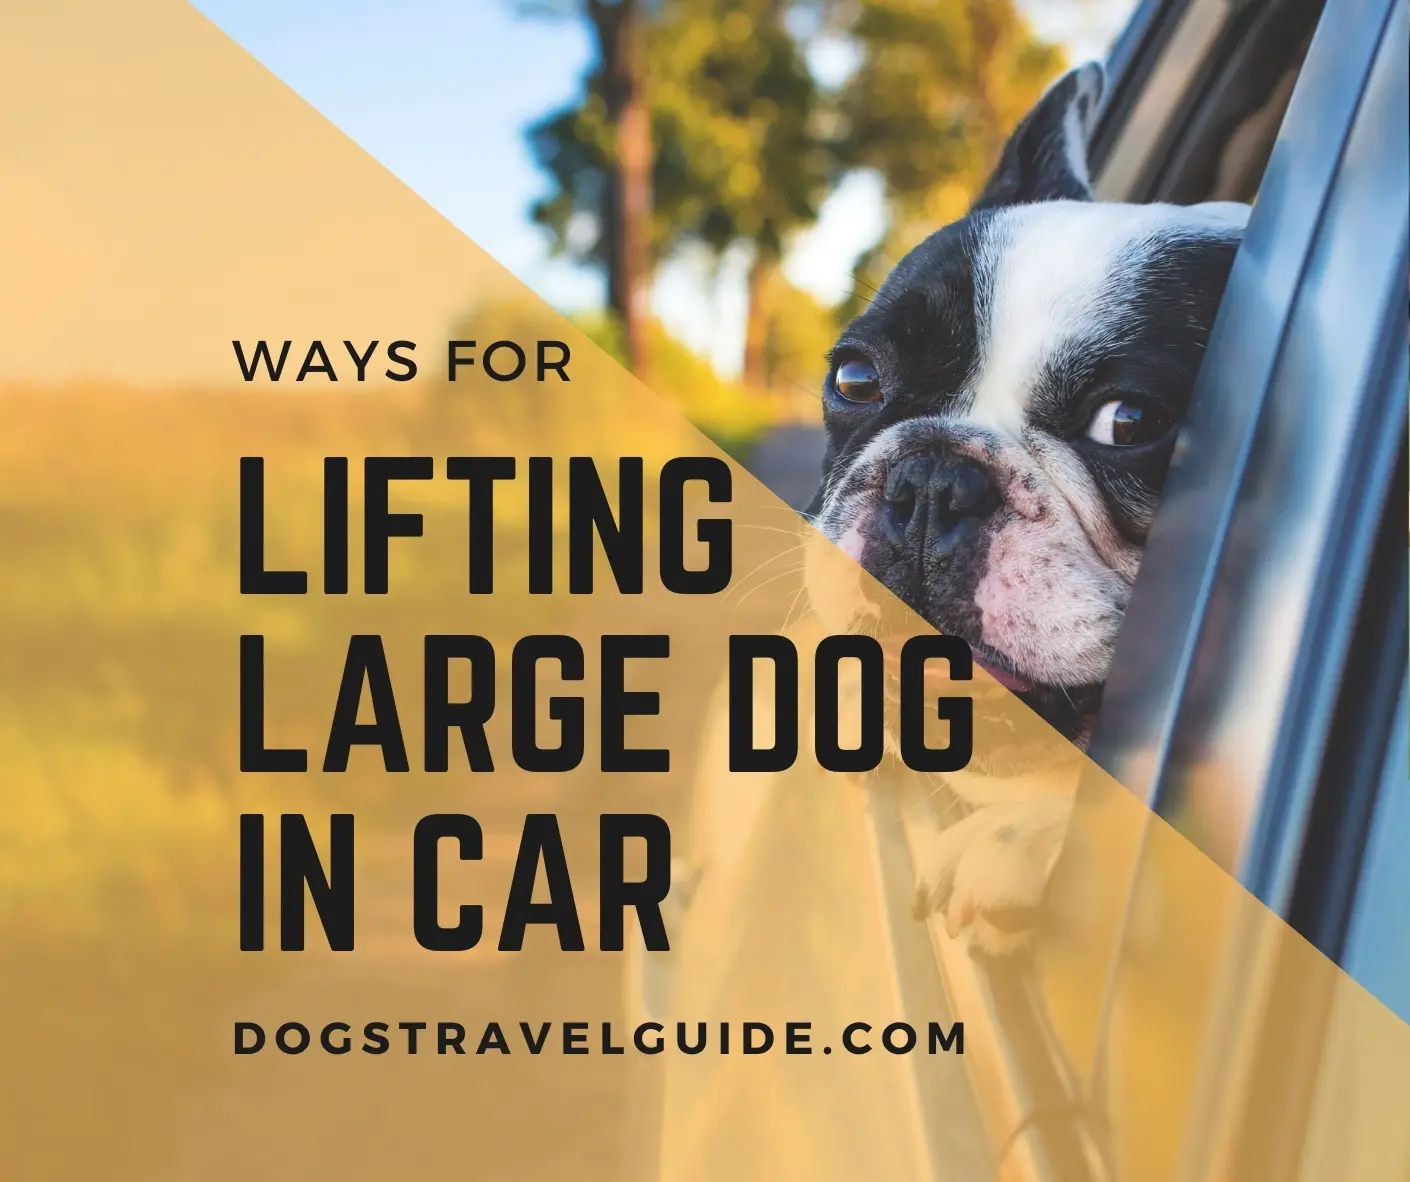 How To Lift A Large Dog Into A Car? - Dogs Travel Guide